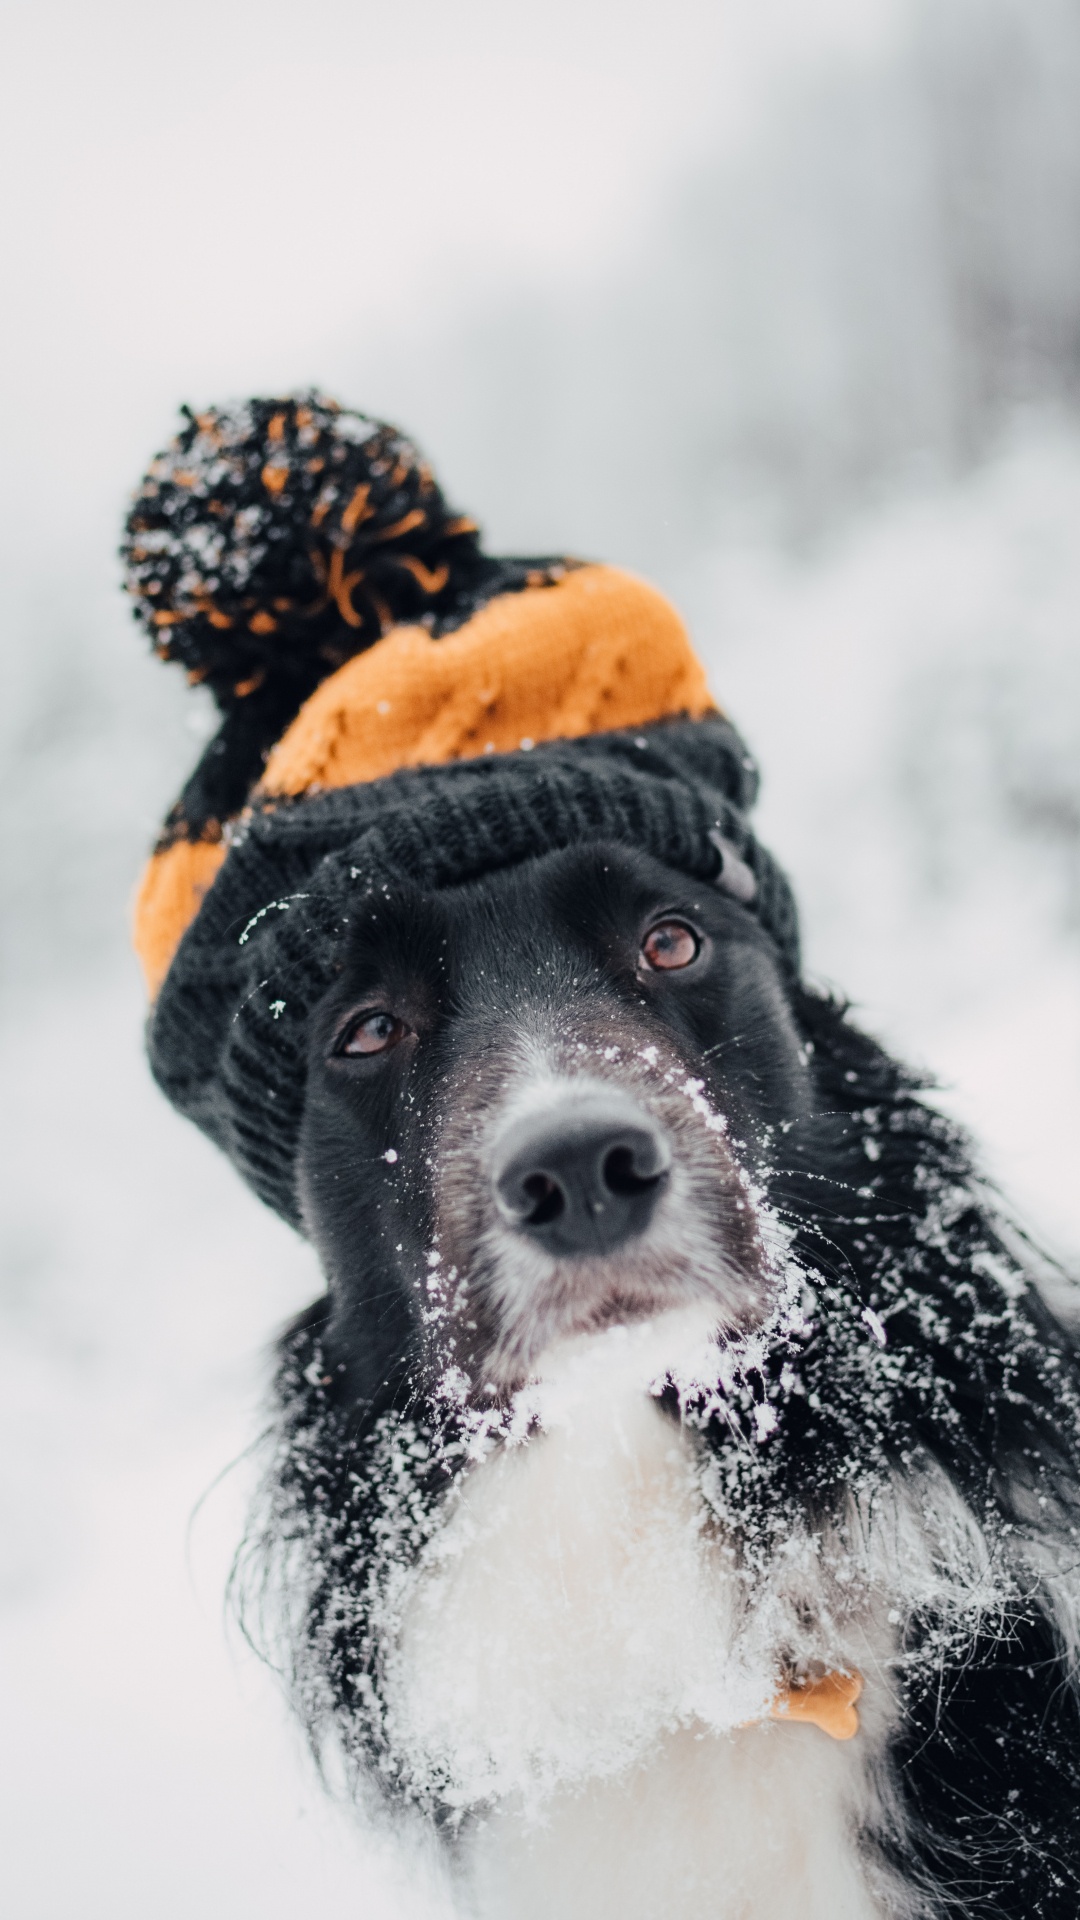 Black and White Border Collie Wearing Orange Knit Cap and Orange Knit Cap. Wallpaper in 1080x1920 Resolution